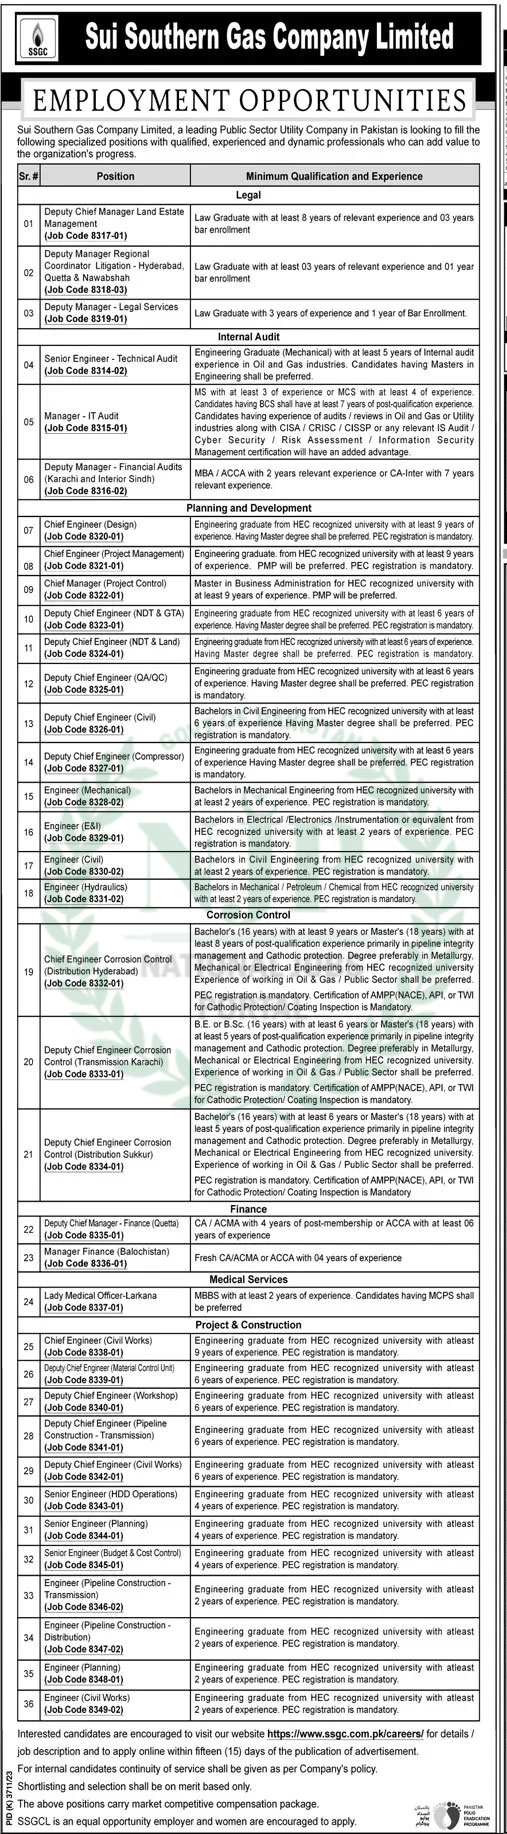 Sui Southern Gas Company SSGC Jobs Advertisements